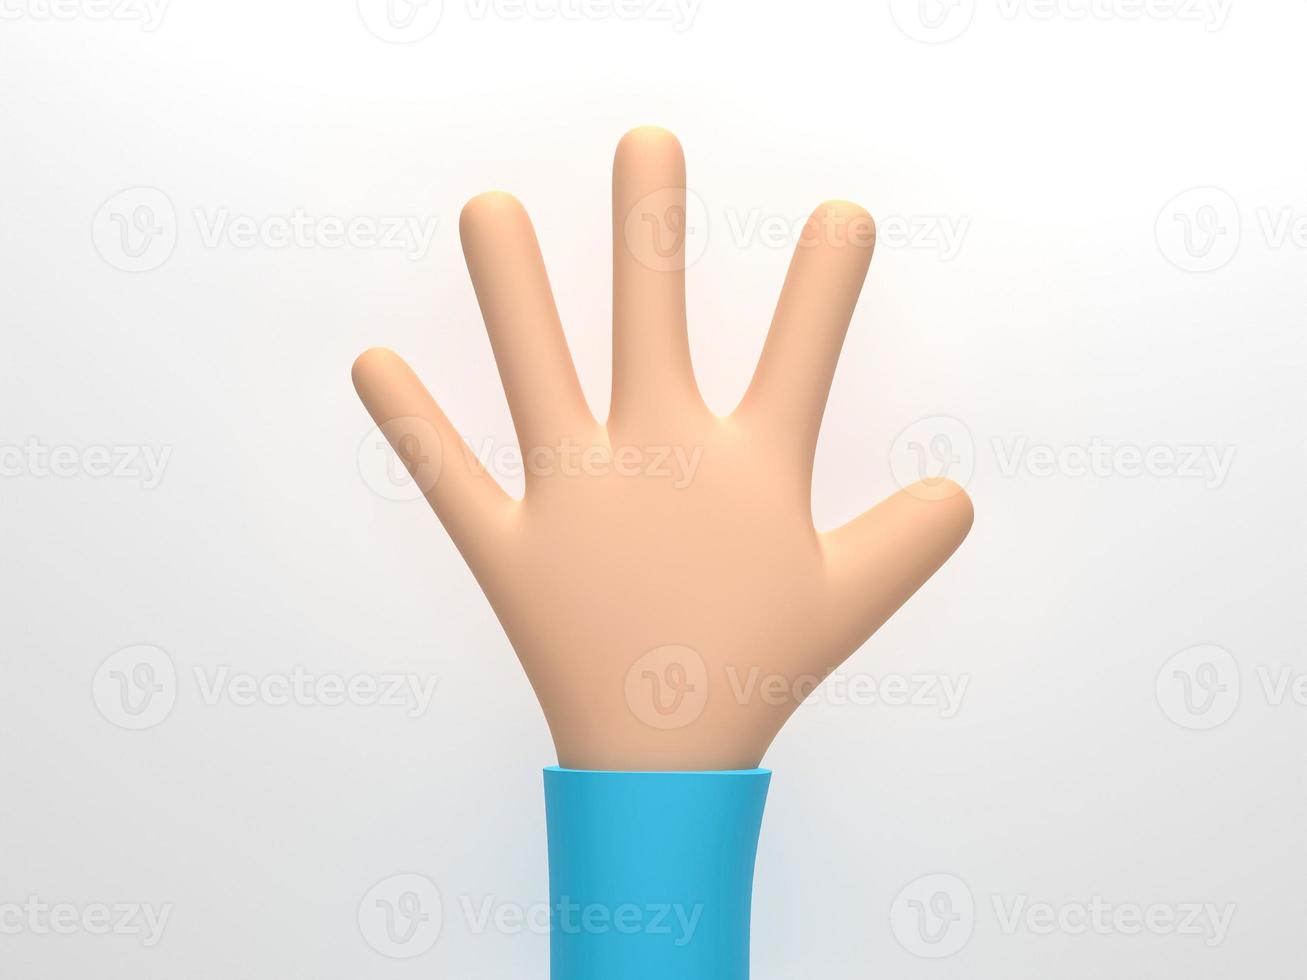 3D rendering, 3D illustration. Cartoon character hand isolated on white background. Simple open palm gesture photo